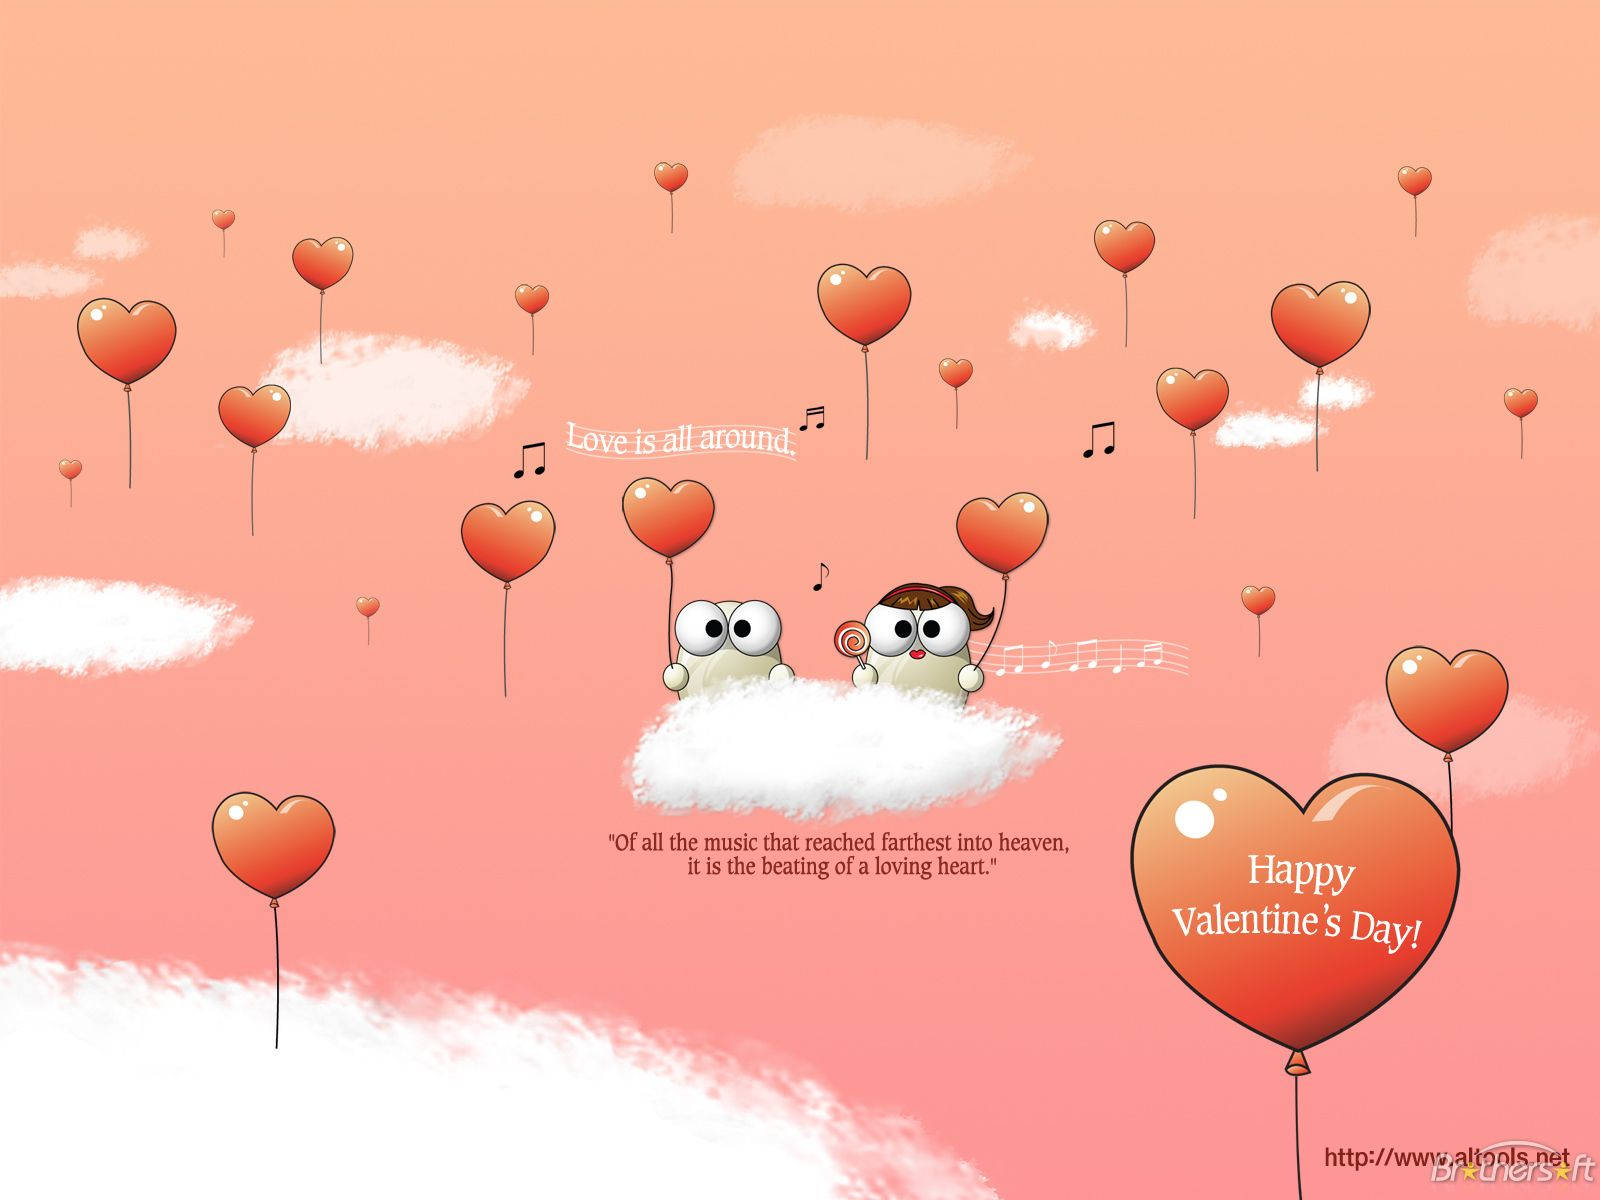 Cute Valentine's Day Heart Balloons Wallpaper